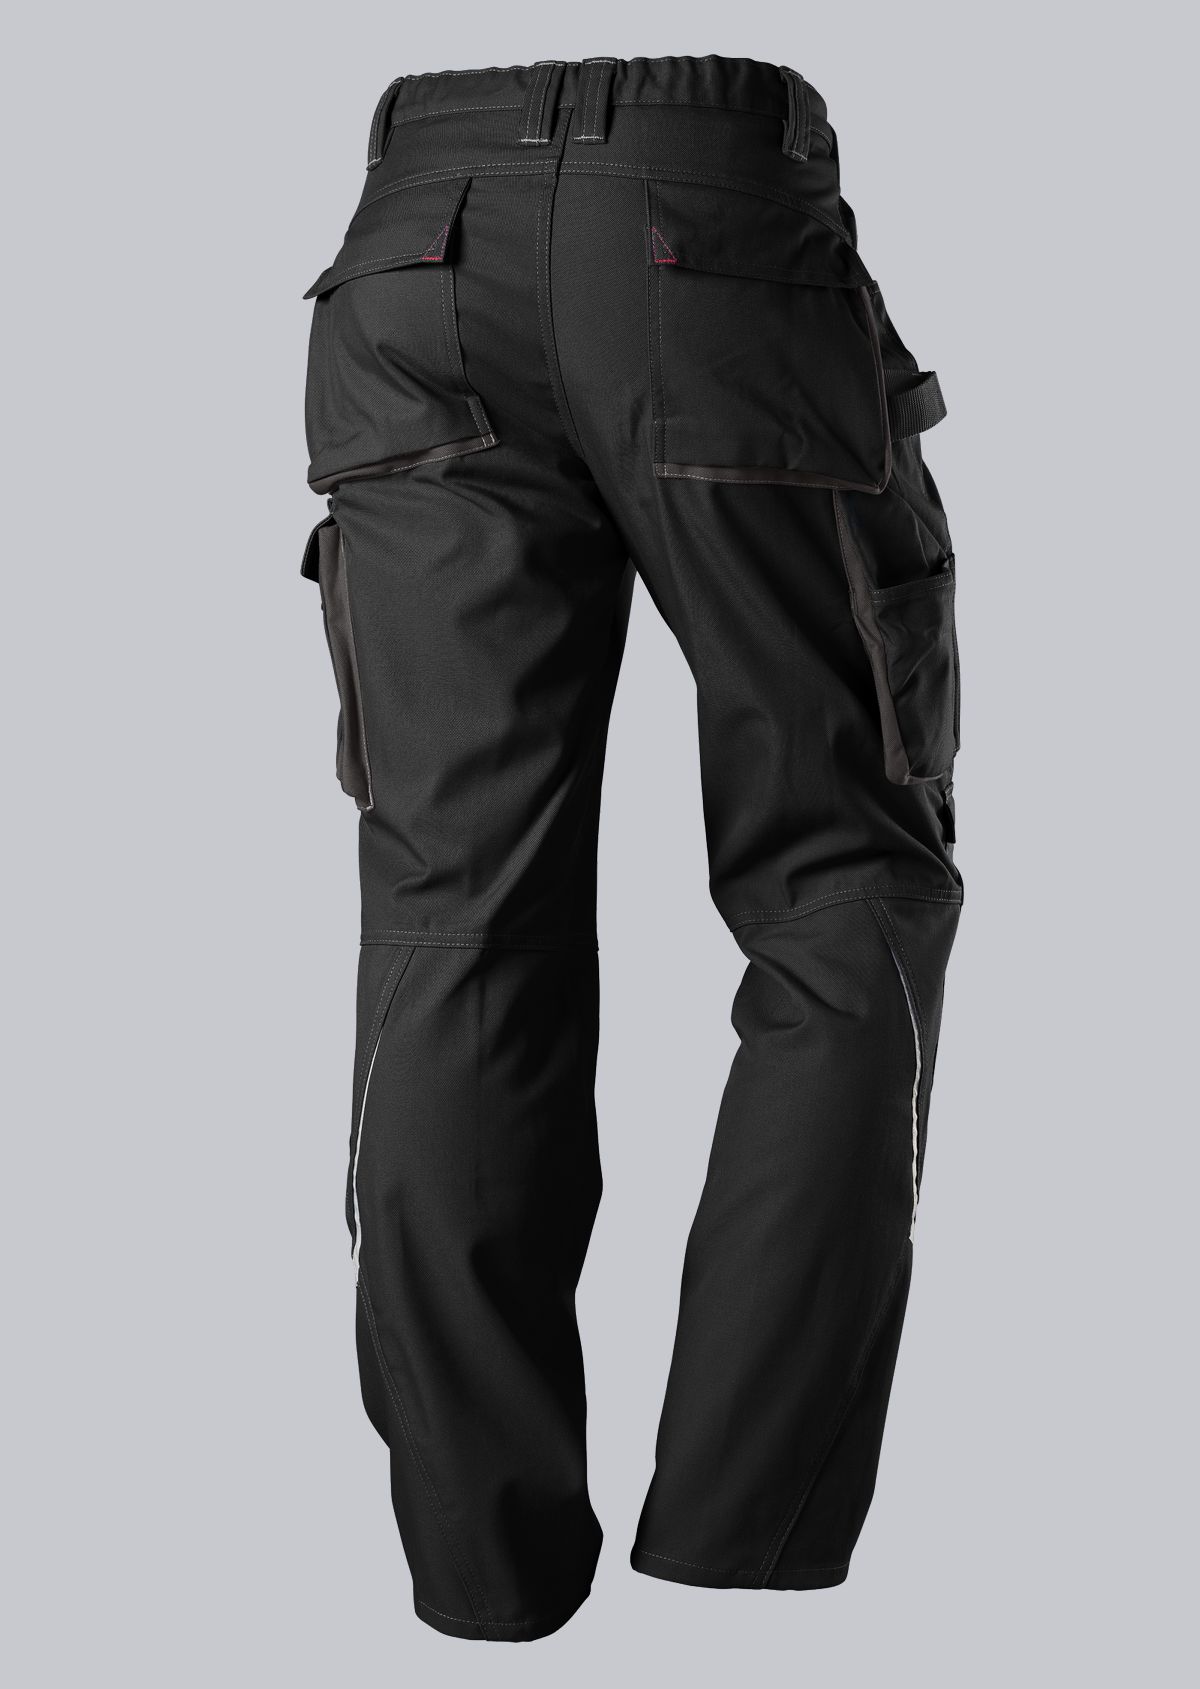 BP® Comfort work trousers with reflectors and knee pad pockets